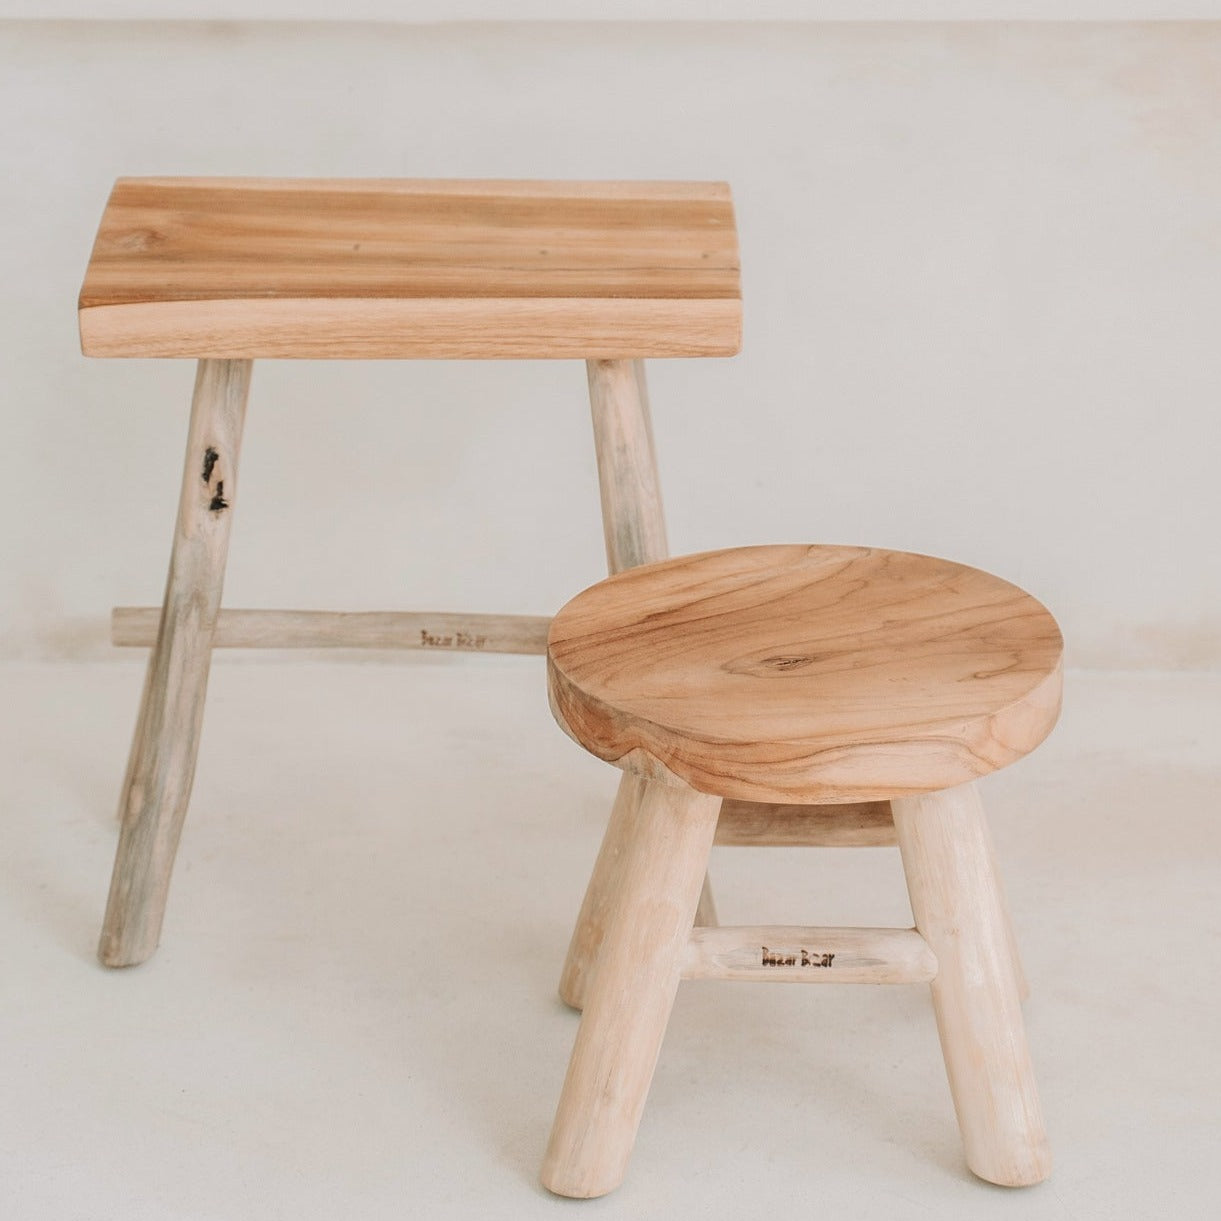 THE KALAK Stool front view two stools